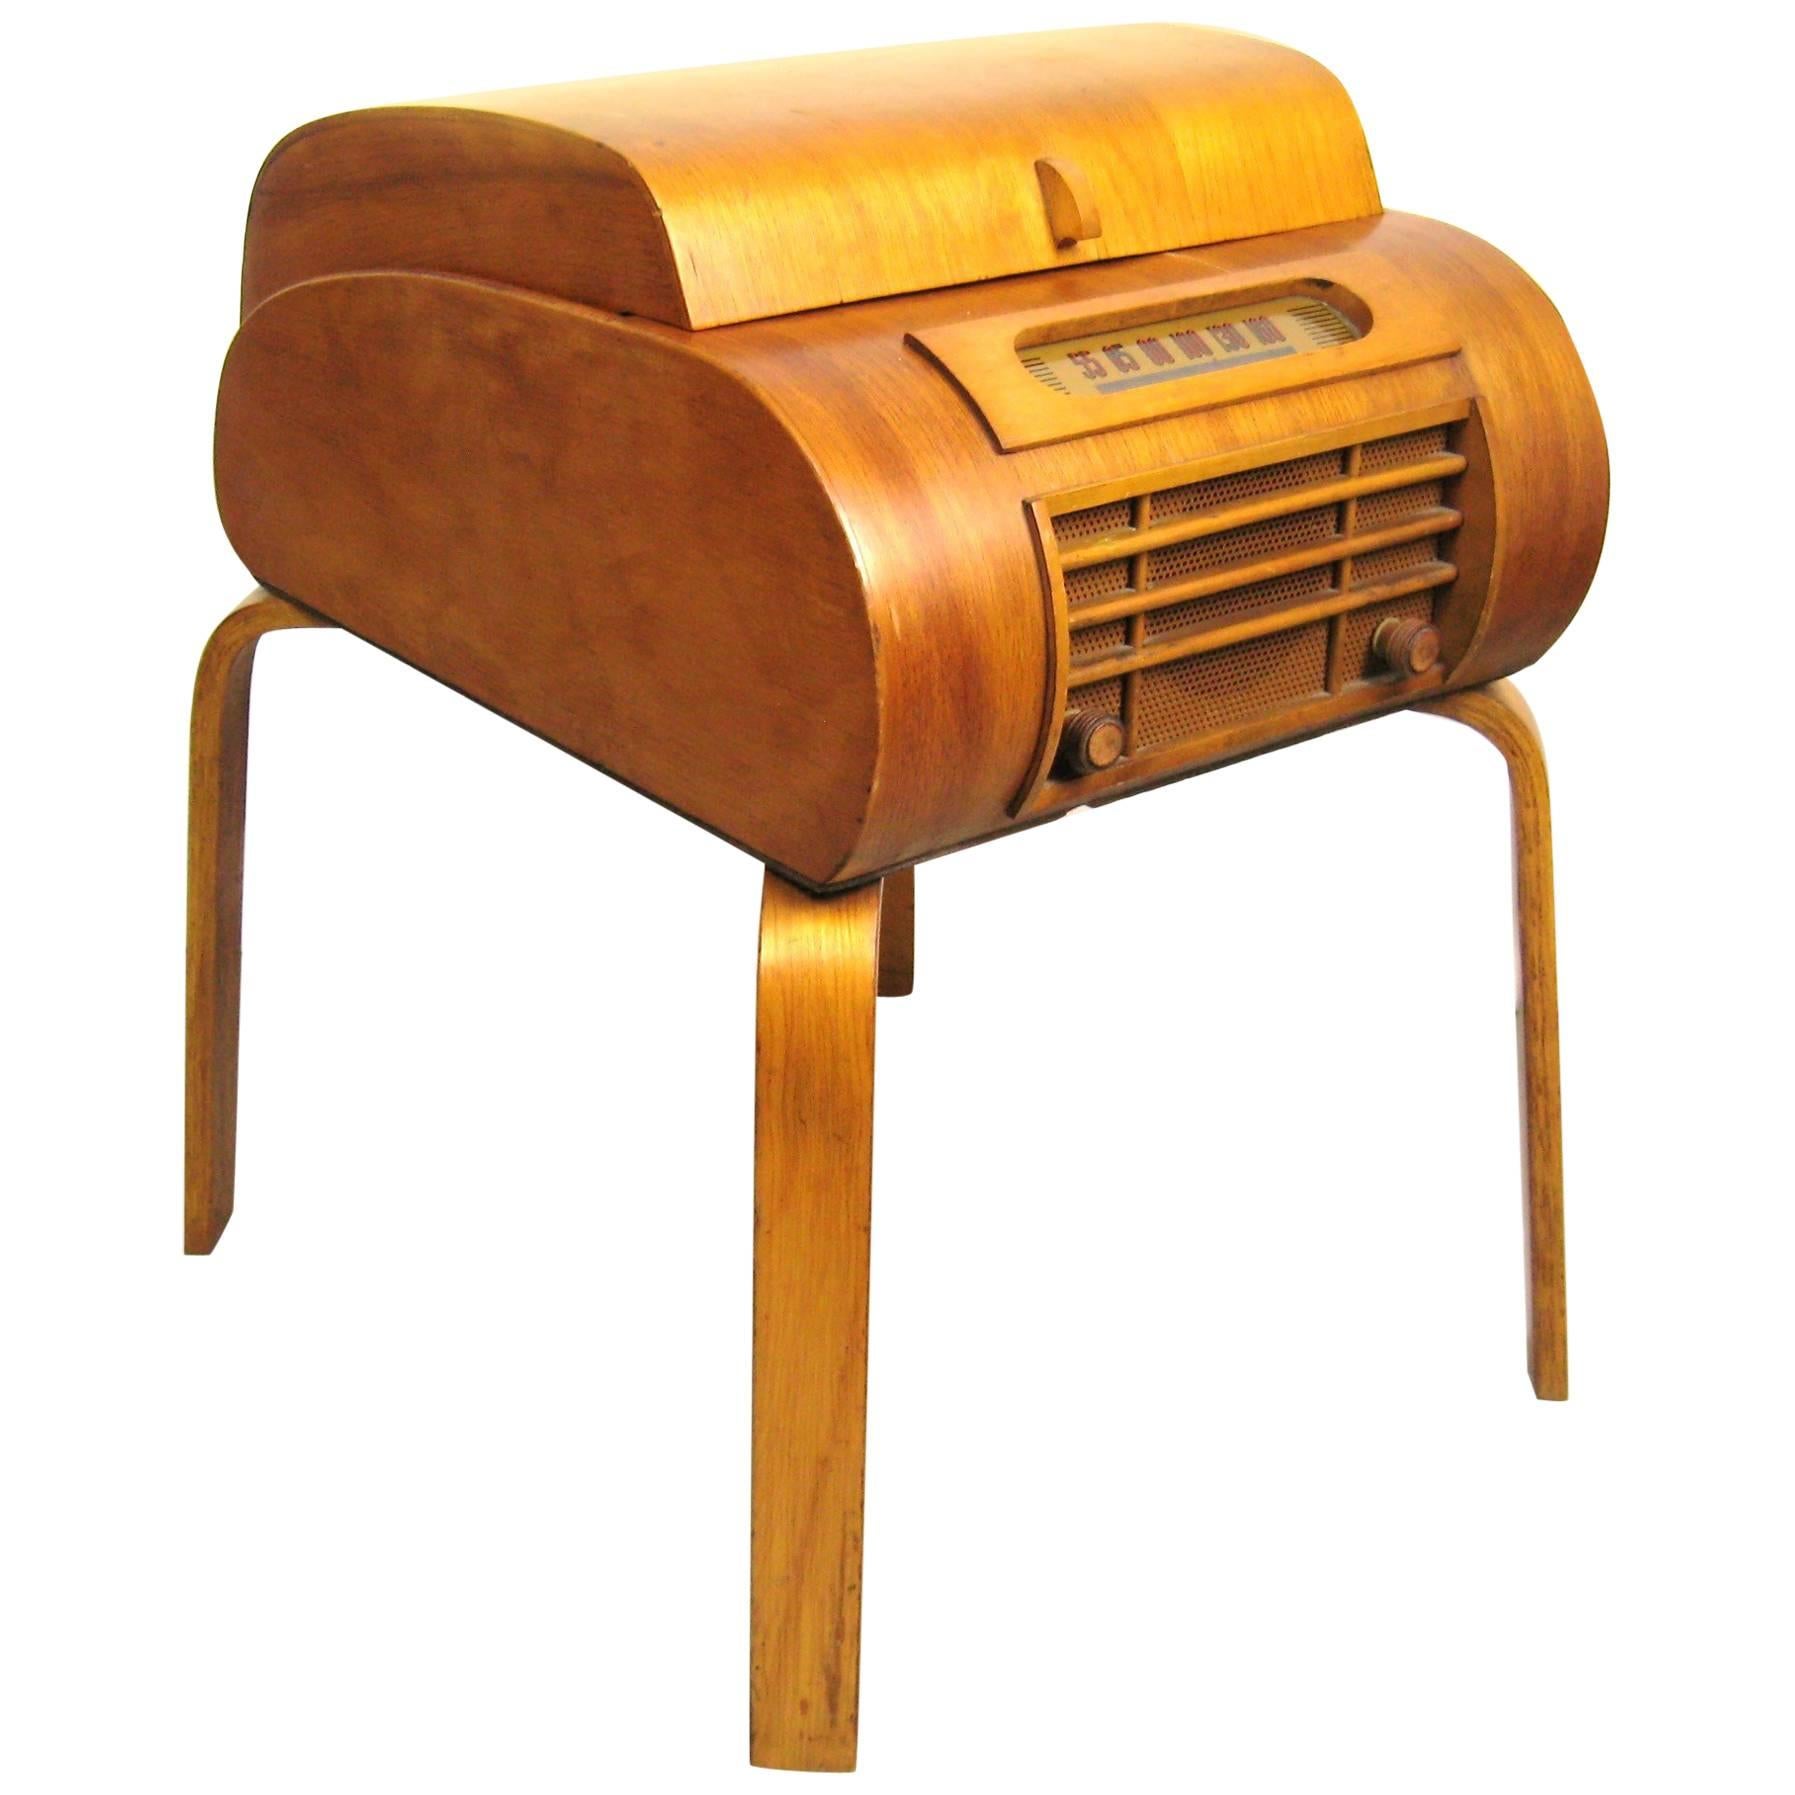 Bent Plywood 1940s Radio Bsr Phonograph in the Matter of Alvar Aalto